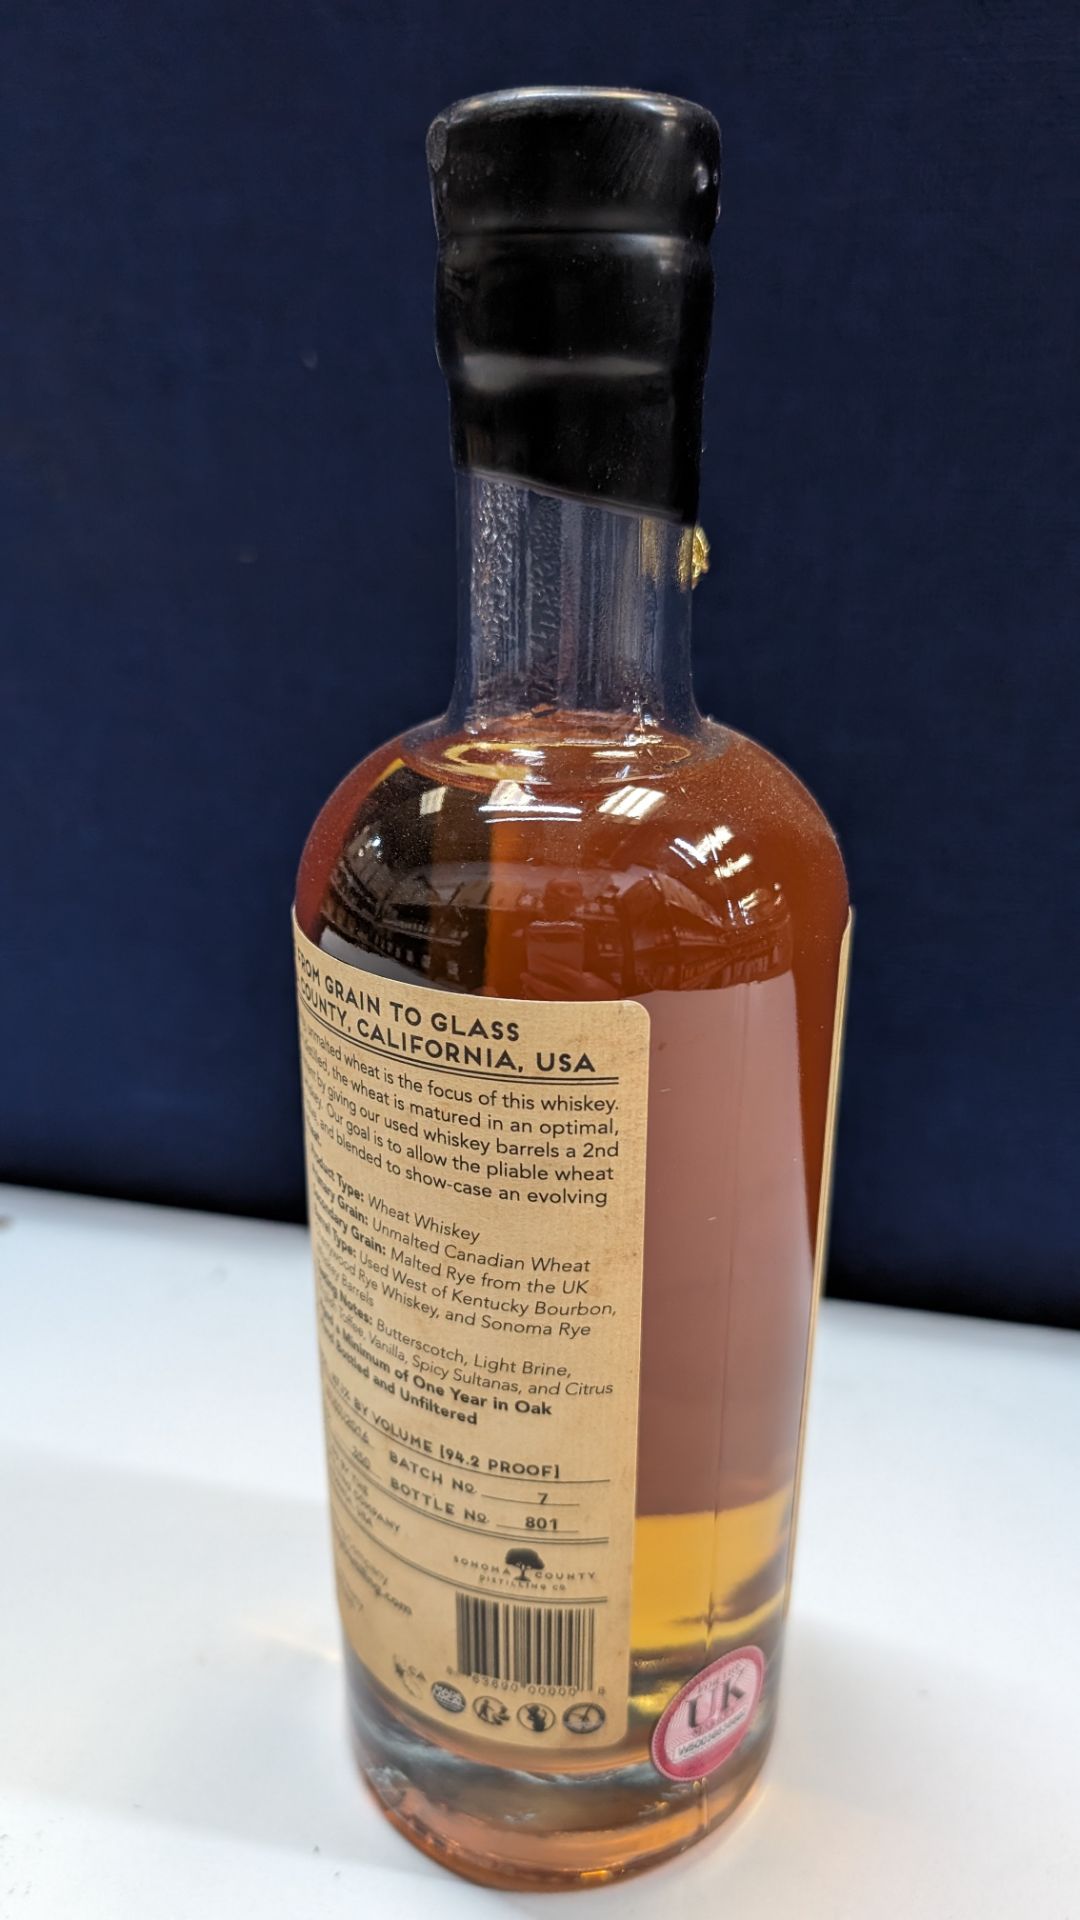 1 off 700ml bottle of Sonoma County 2nd Chance Wheat Double Alembic Pot Distilled Whiskey. 47.1% al - Image 4 of 6